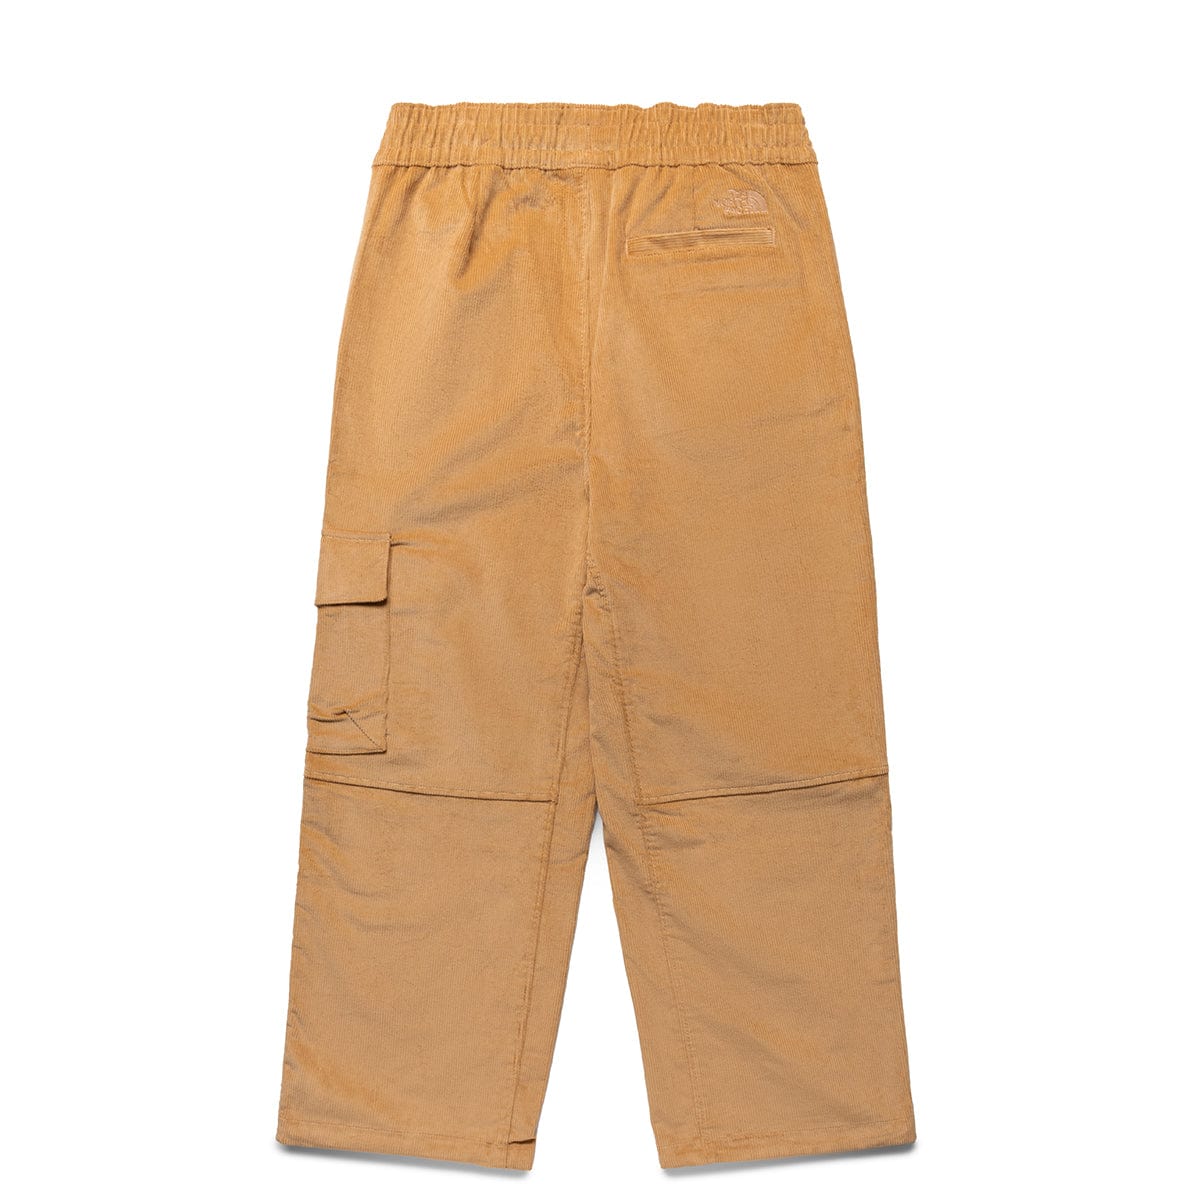 The North Face Bottoms CORDUROY UTILITY EASY PANTS